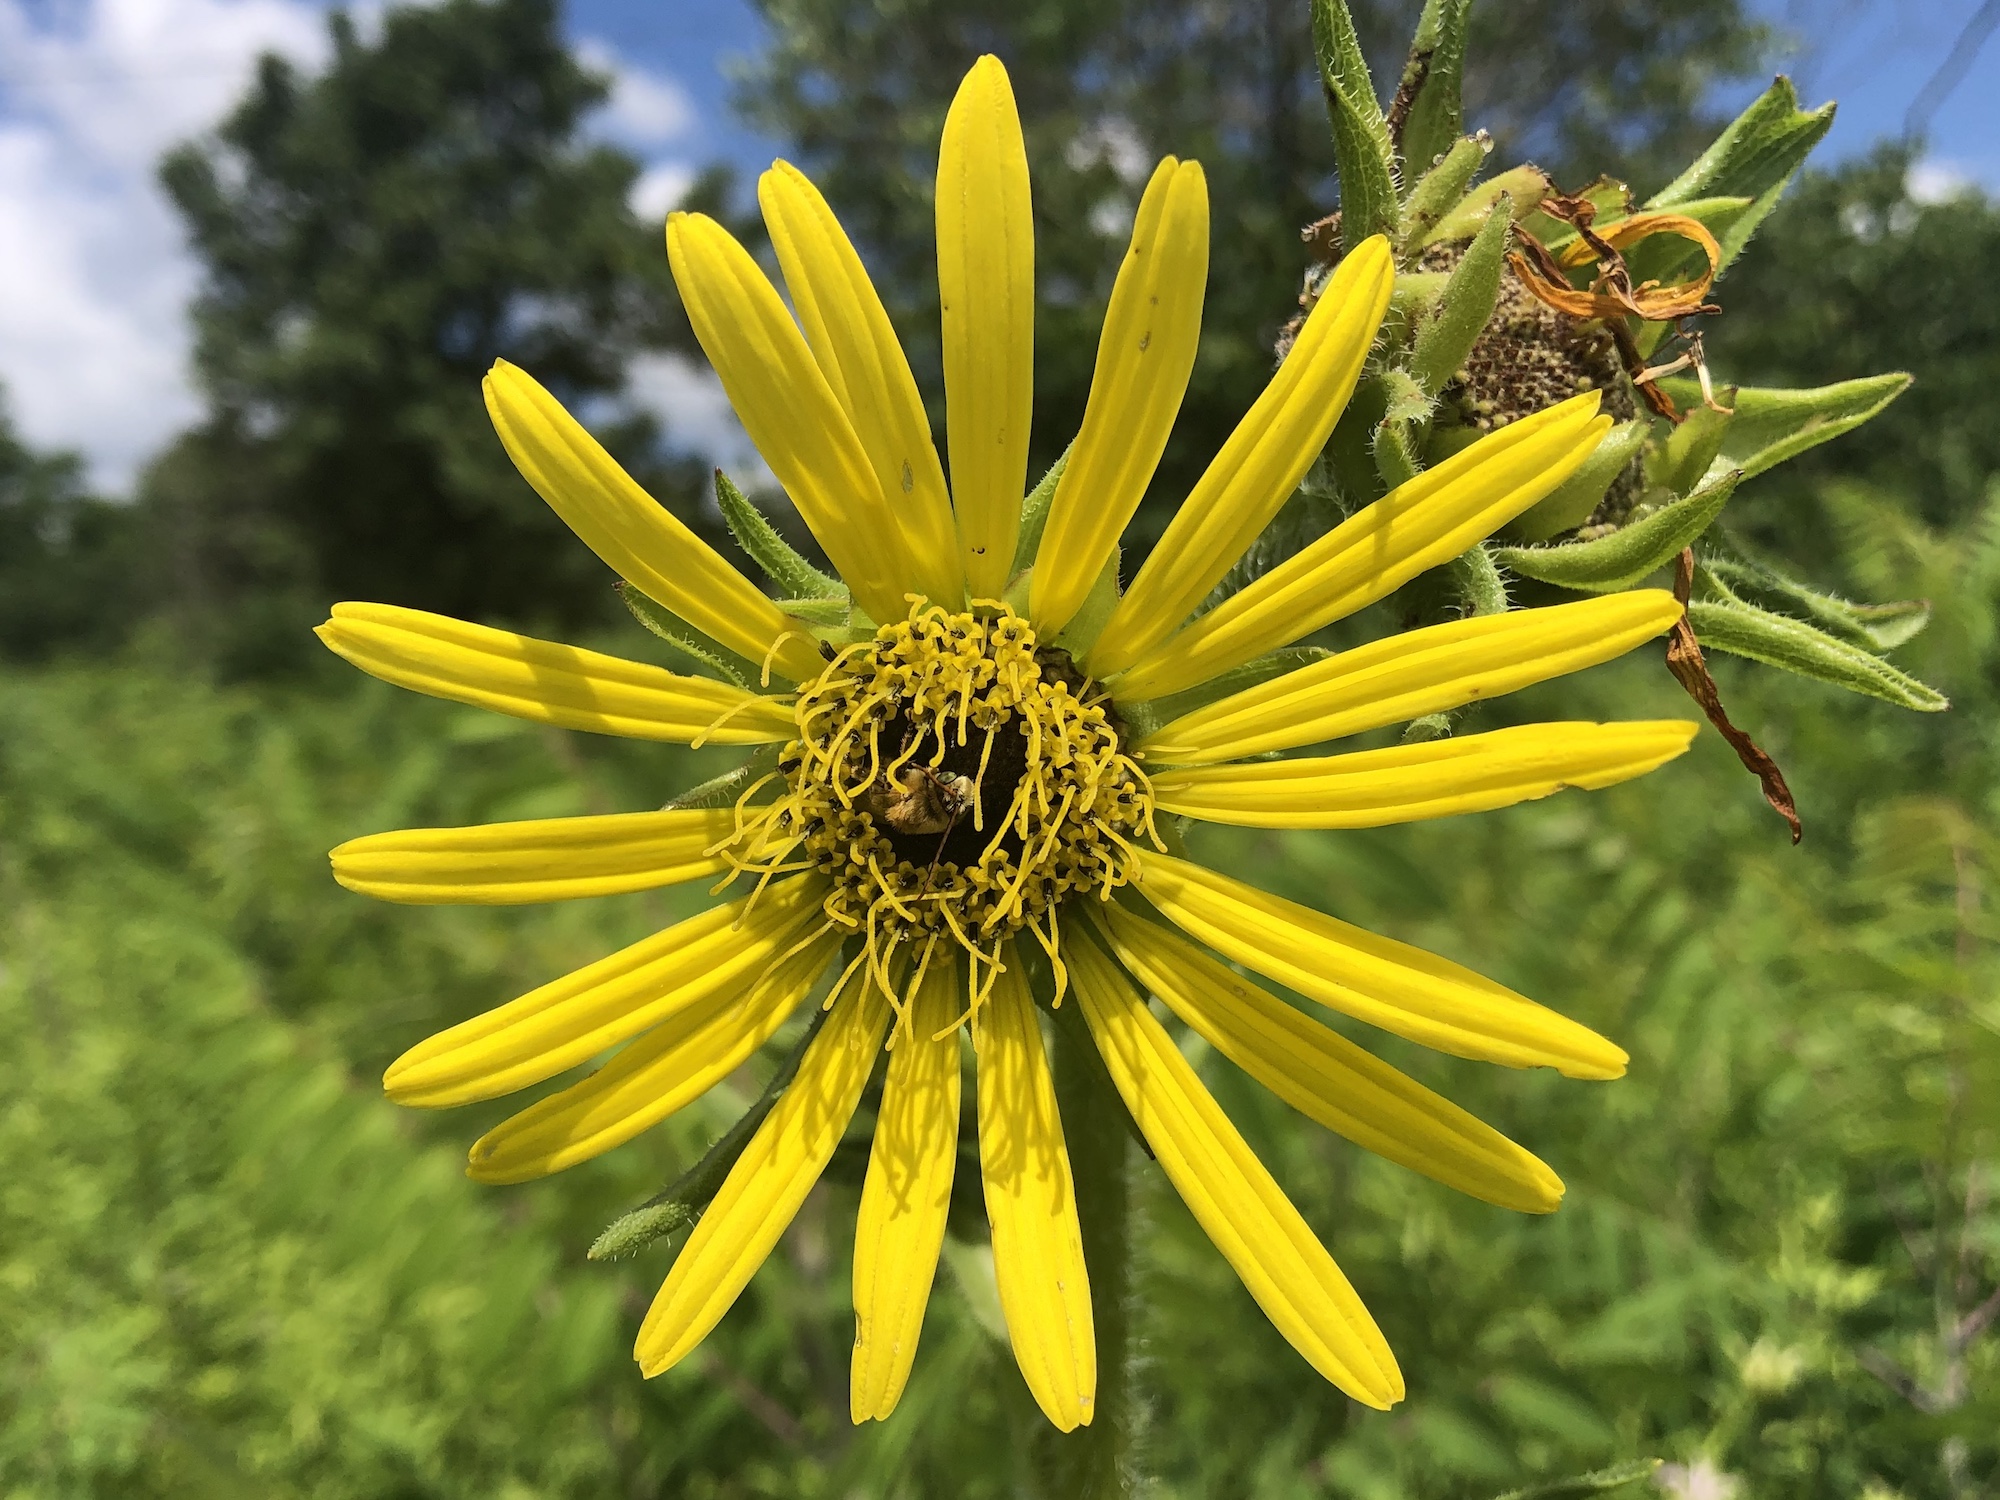 Basal-leaved  Rosinweed in the UW-Madison Arboretum in Madison, Wisconsin on July 12, 2020.